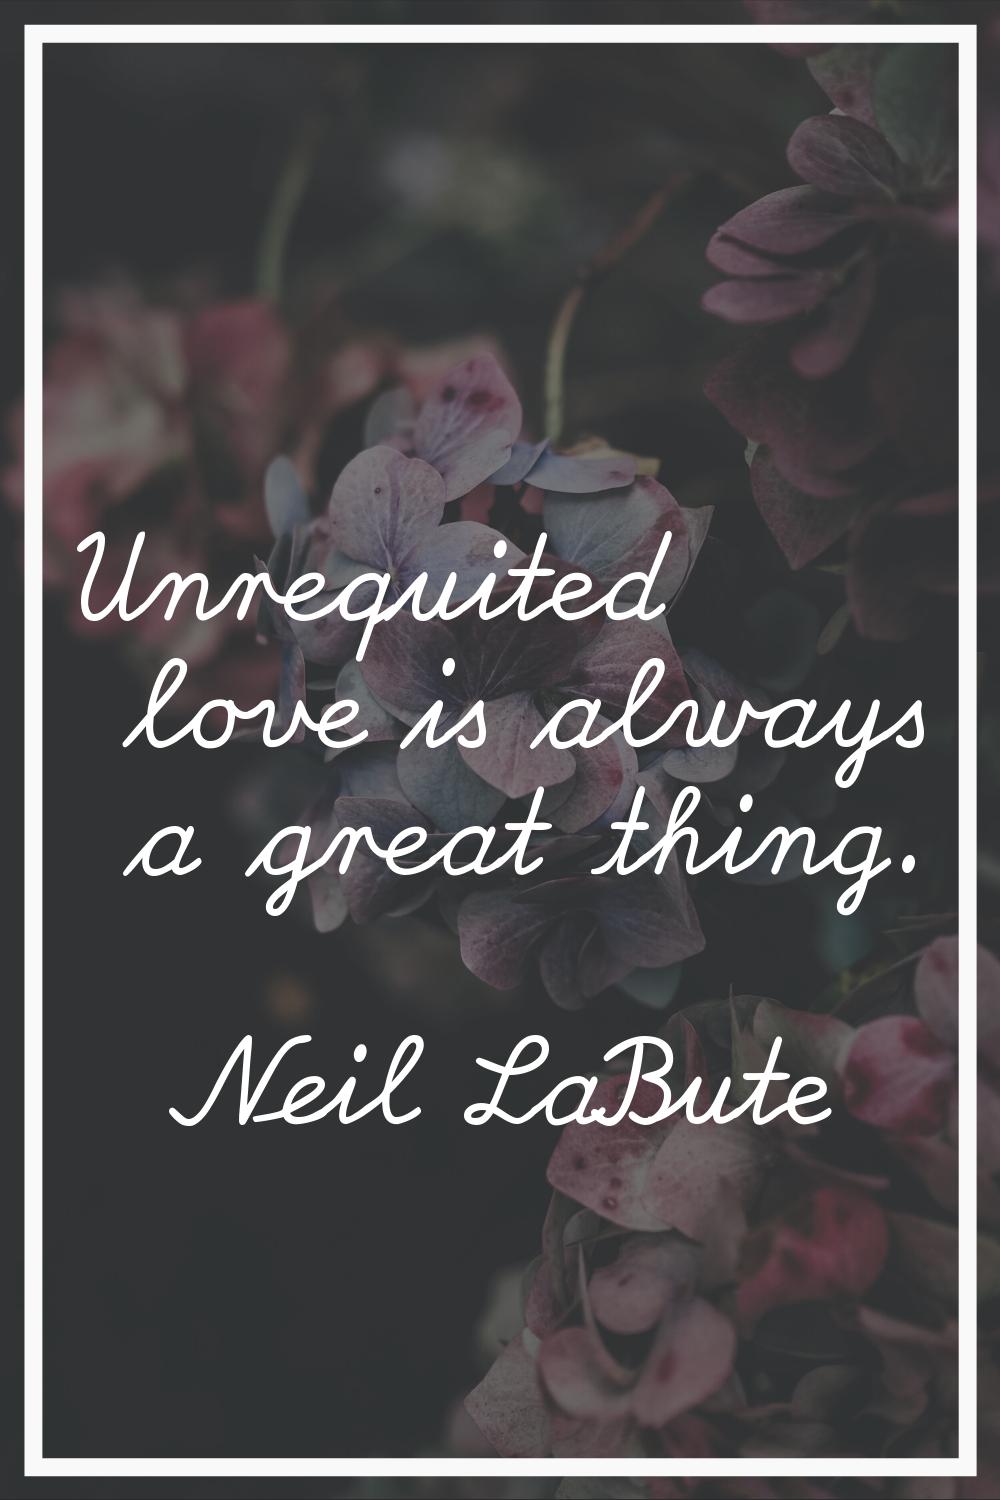 Unrequited love is always a great thing.